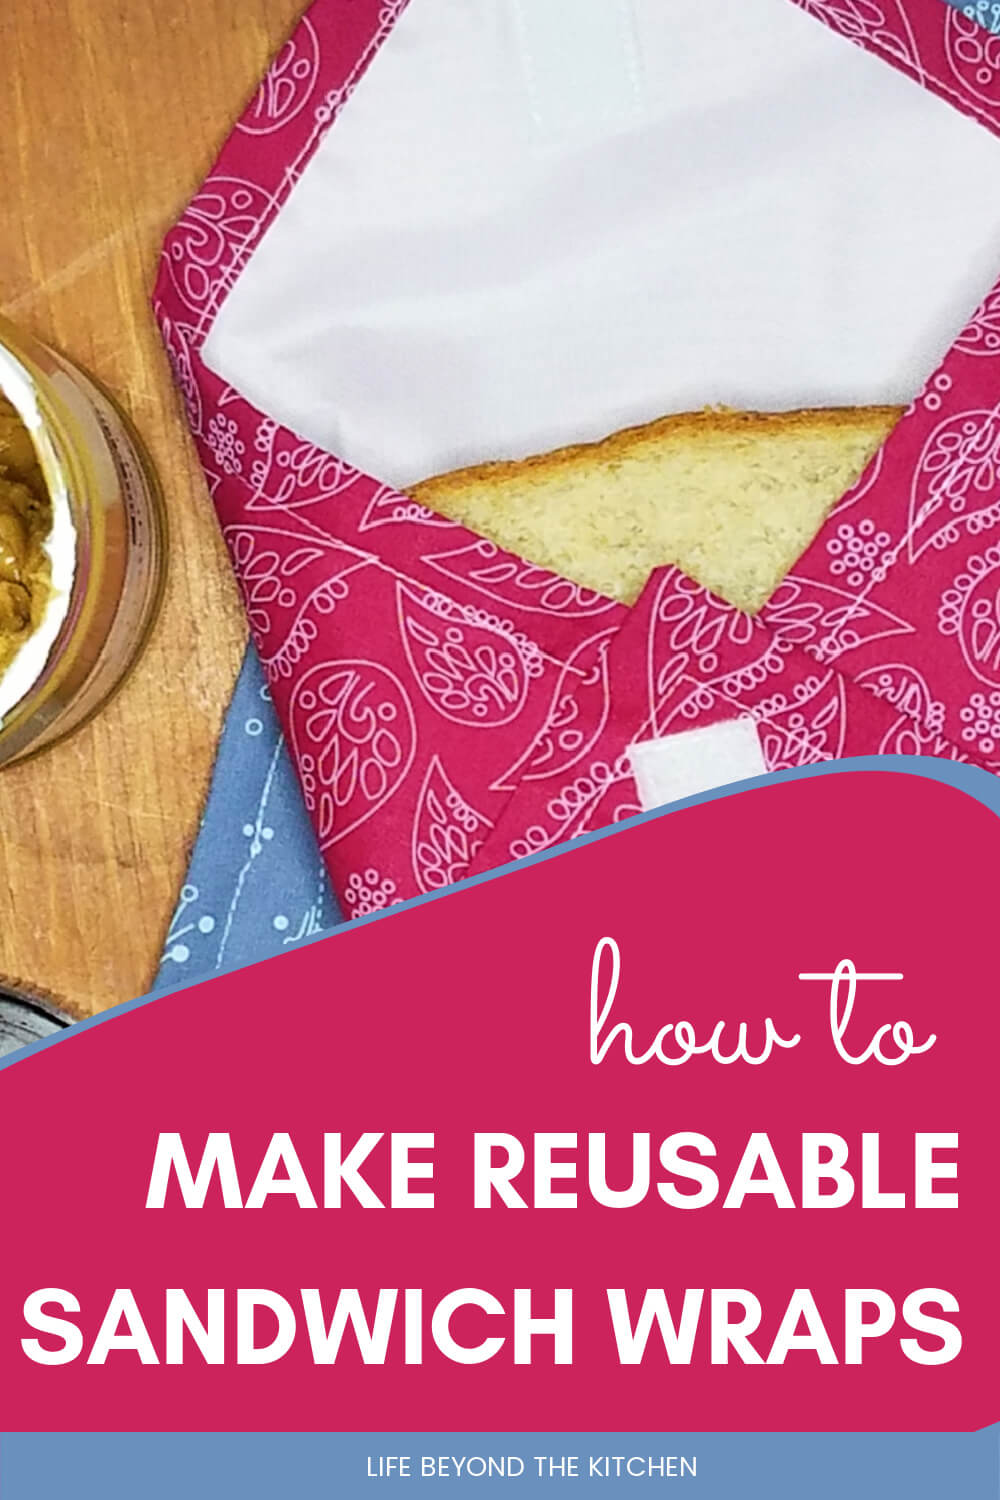 How To Make A Reusable Sandwich Wrap ⋆ A Rose Tinted World